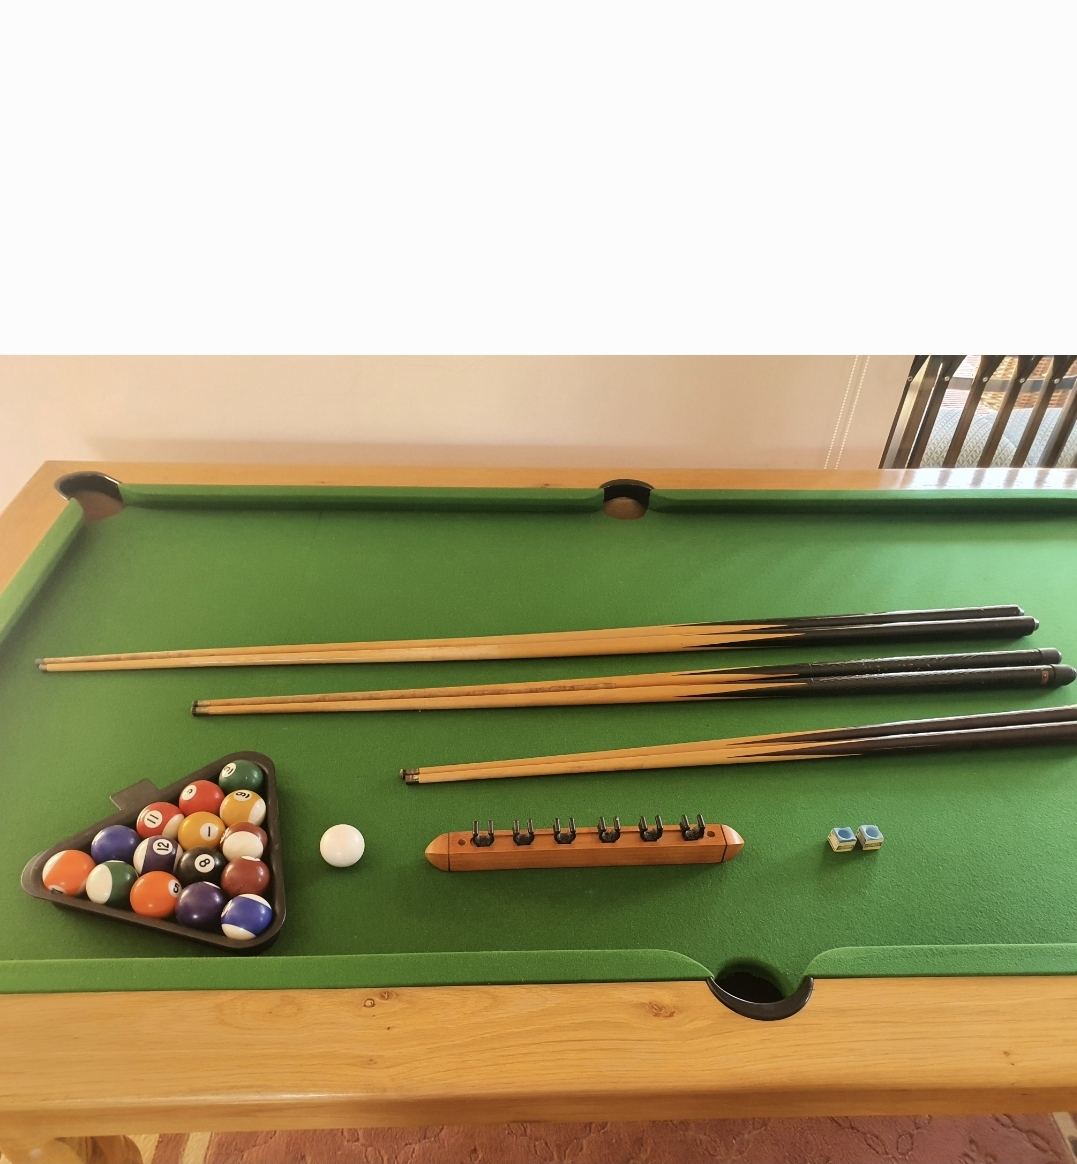 Pool table for sale, heavy, solid wood, very good condition.